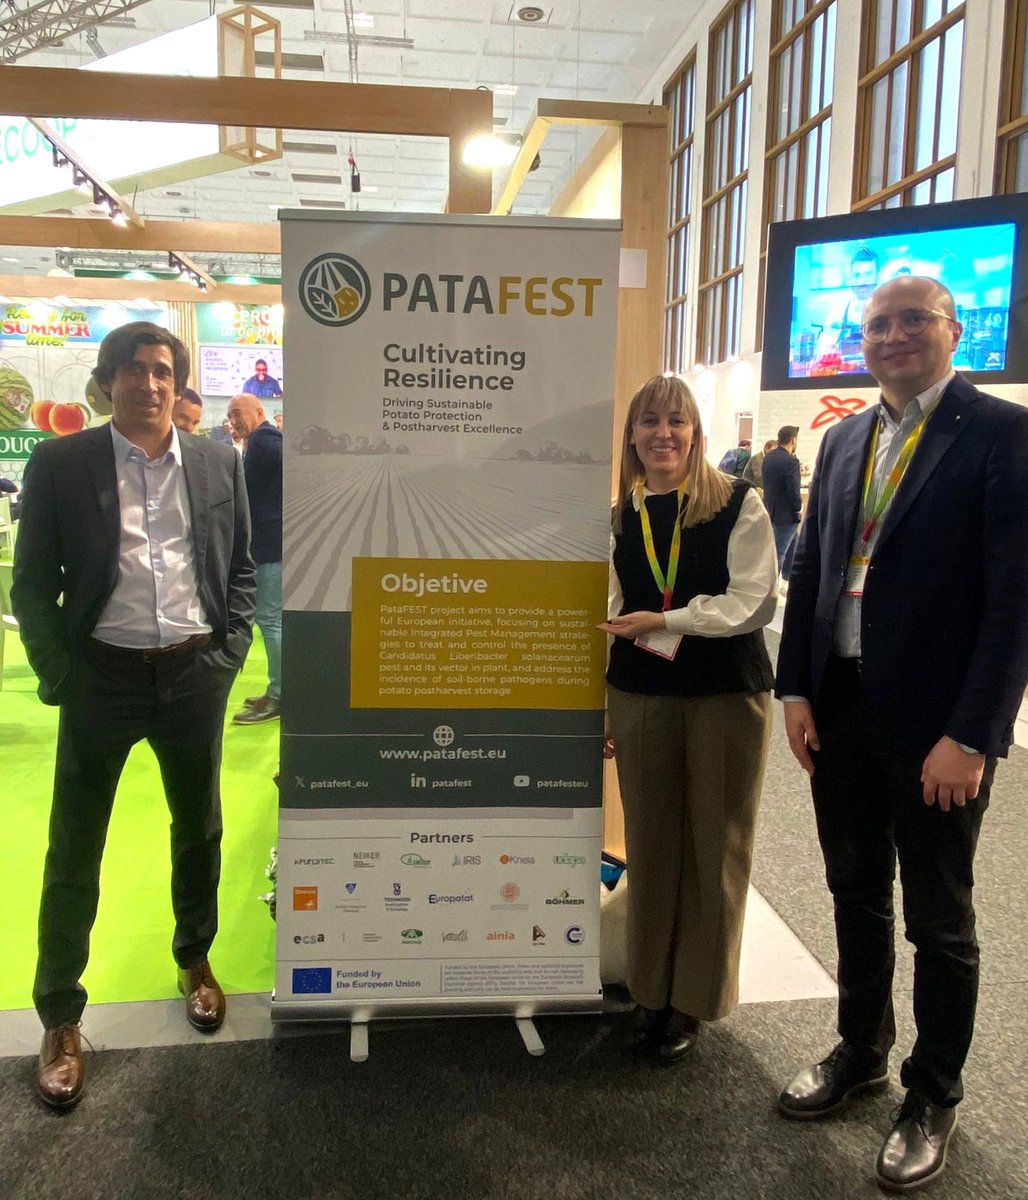 'Last week, our project PATAFEST was showcased at #FRUITLOGISTICA2024, the top international #trade fair for #freshproducts, incl. #potatoes! 🥔

Our Consortium memebers Anecoop, BÖHMER Gruppe , @Europatat presented our objectives & current work. 
#FL24 hosted 2,700🌍